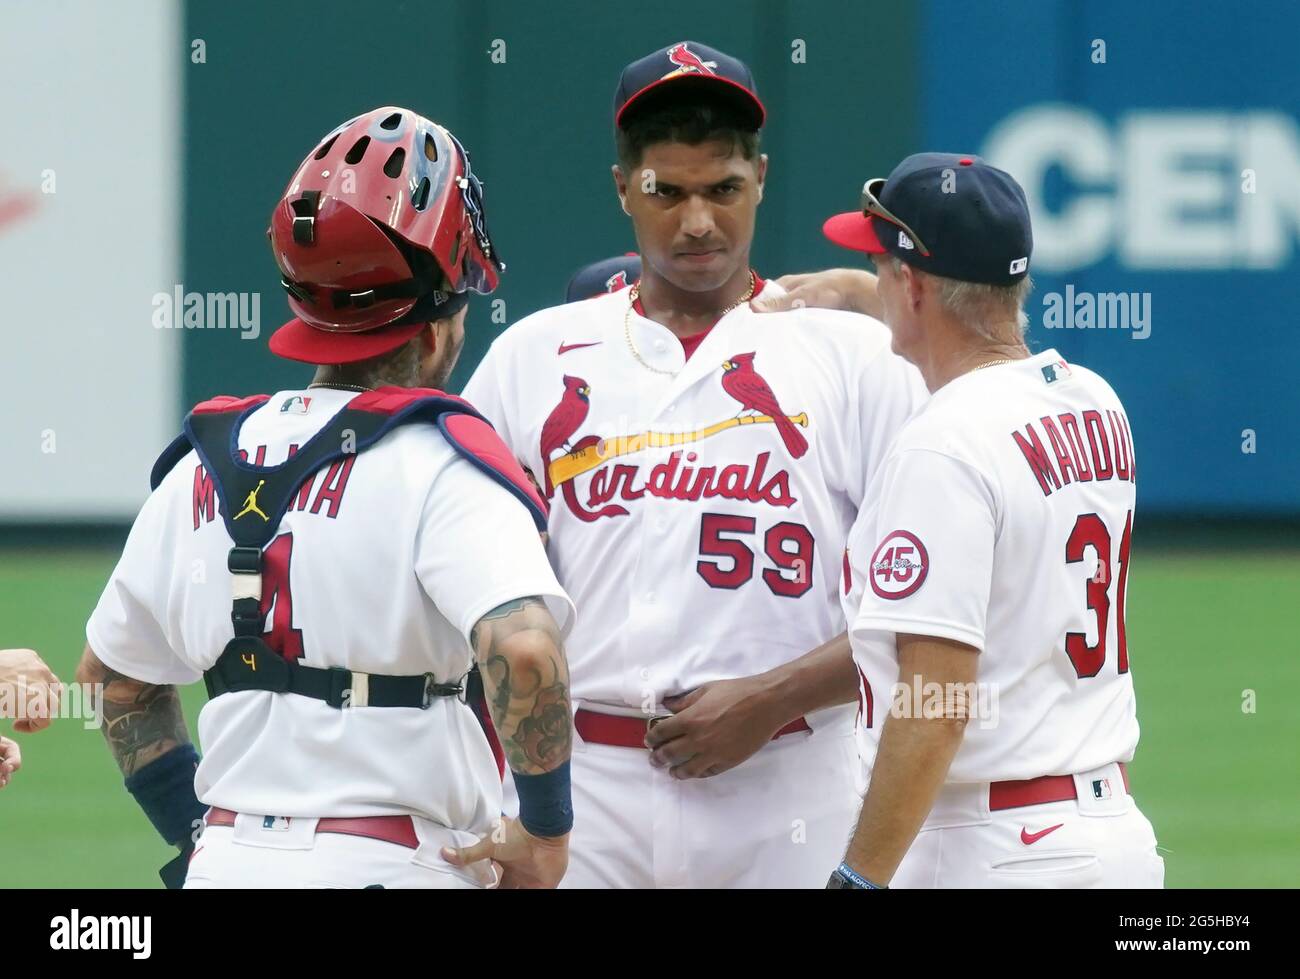 St. Louis, United States. 27th June, 2021. St. Louis Cardinals starting  pitcher Johan Oviedo gets a mound visit by catcher Yadier Molina and  pitching coach Mike Maddux after getting into trouble in